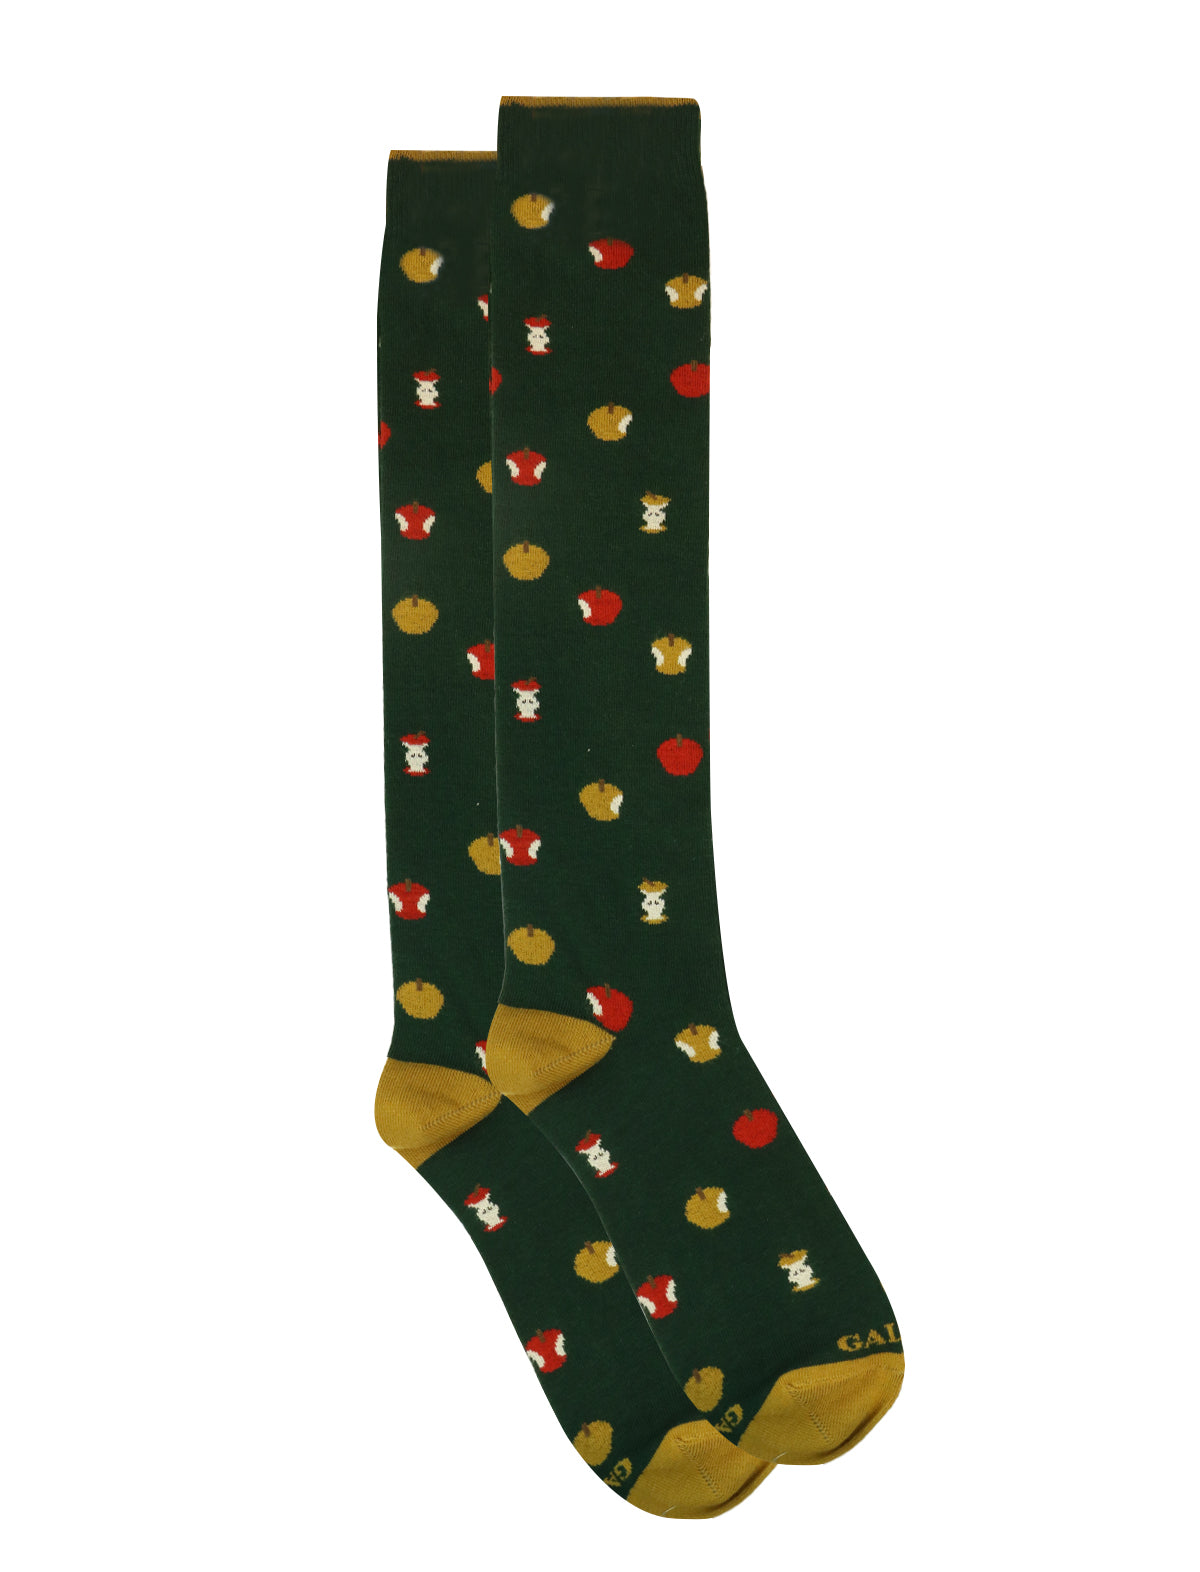 Gallo Long Socks in Forest Green w/ Apples Print